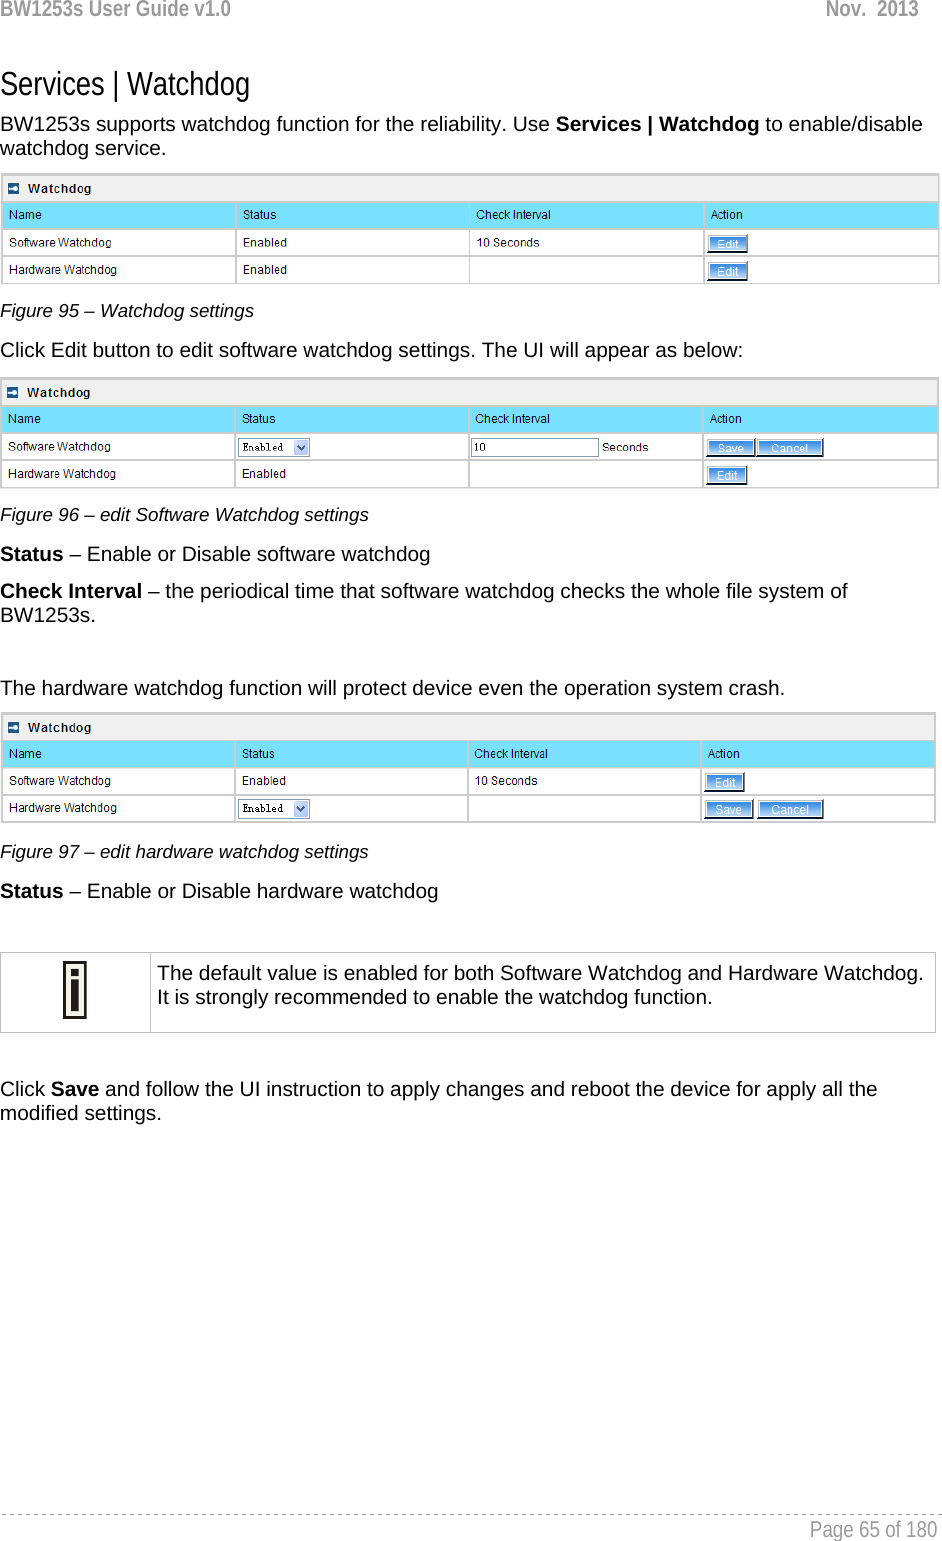 BW1253s User Guide v1.0  Nov.  2013     Page 65 of 180   Services | Watchdog BW1253s supports watchdog function for the reliability. Use Services | Watchdog to enable/disable watchdog service.   Figure 95 – Watchdog settings Click Edit button to edit software watchdog settings. The UI will appear as below:  Figure 96 – edit Software Watchdog settings Status – Enable or Disable software watchdog Check Interval – the periodical time that software watchdog checks the whole file system of BW1253s.   The hardware watchdog function will protect device even the operation system crash.  Figure 97 – edit hardware watchdog settings Status – Enable or Disable hardware watchdog   The default value is enabled for both Software Watchdog and Hardware Watchdog. It is strongly recommended to enable the watchdog function.   Click Save and follow the UI instruction to apply changes and reboot the device for apply all the modified settings.   